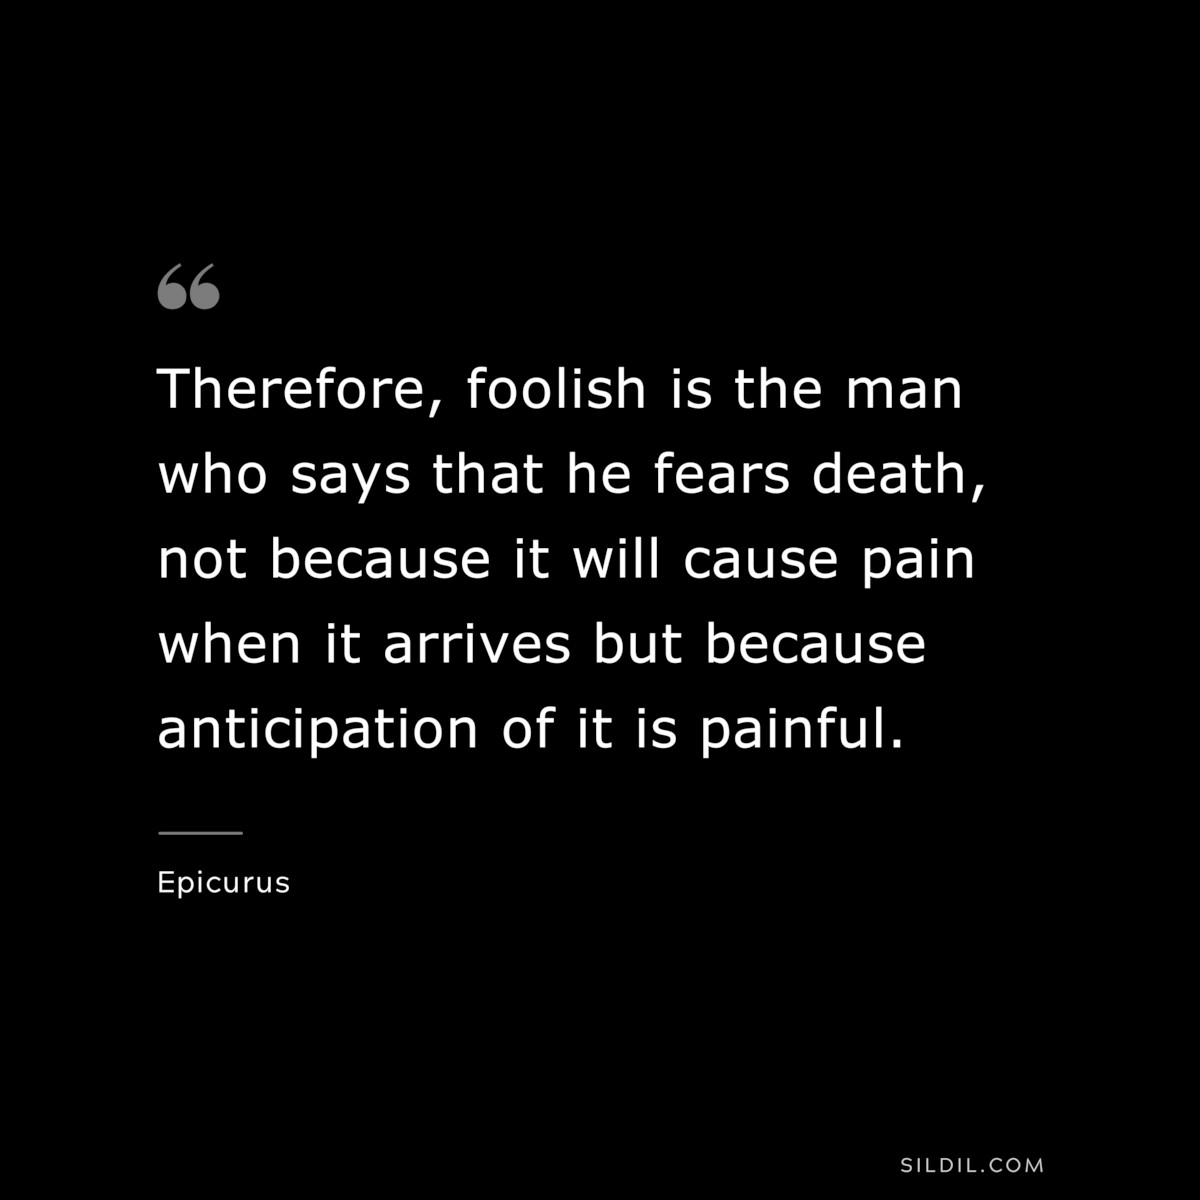 Therefore, foolish is the man who says that he fears death, not because it will cause pain when it arrives but because anticipation of it is painful. — Epicurus